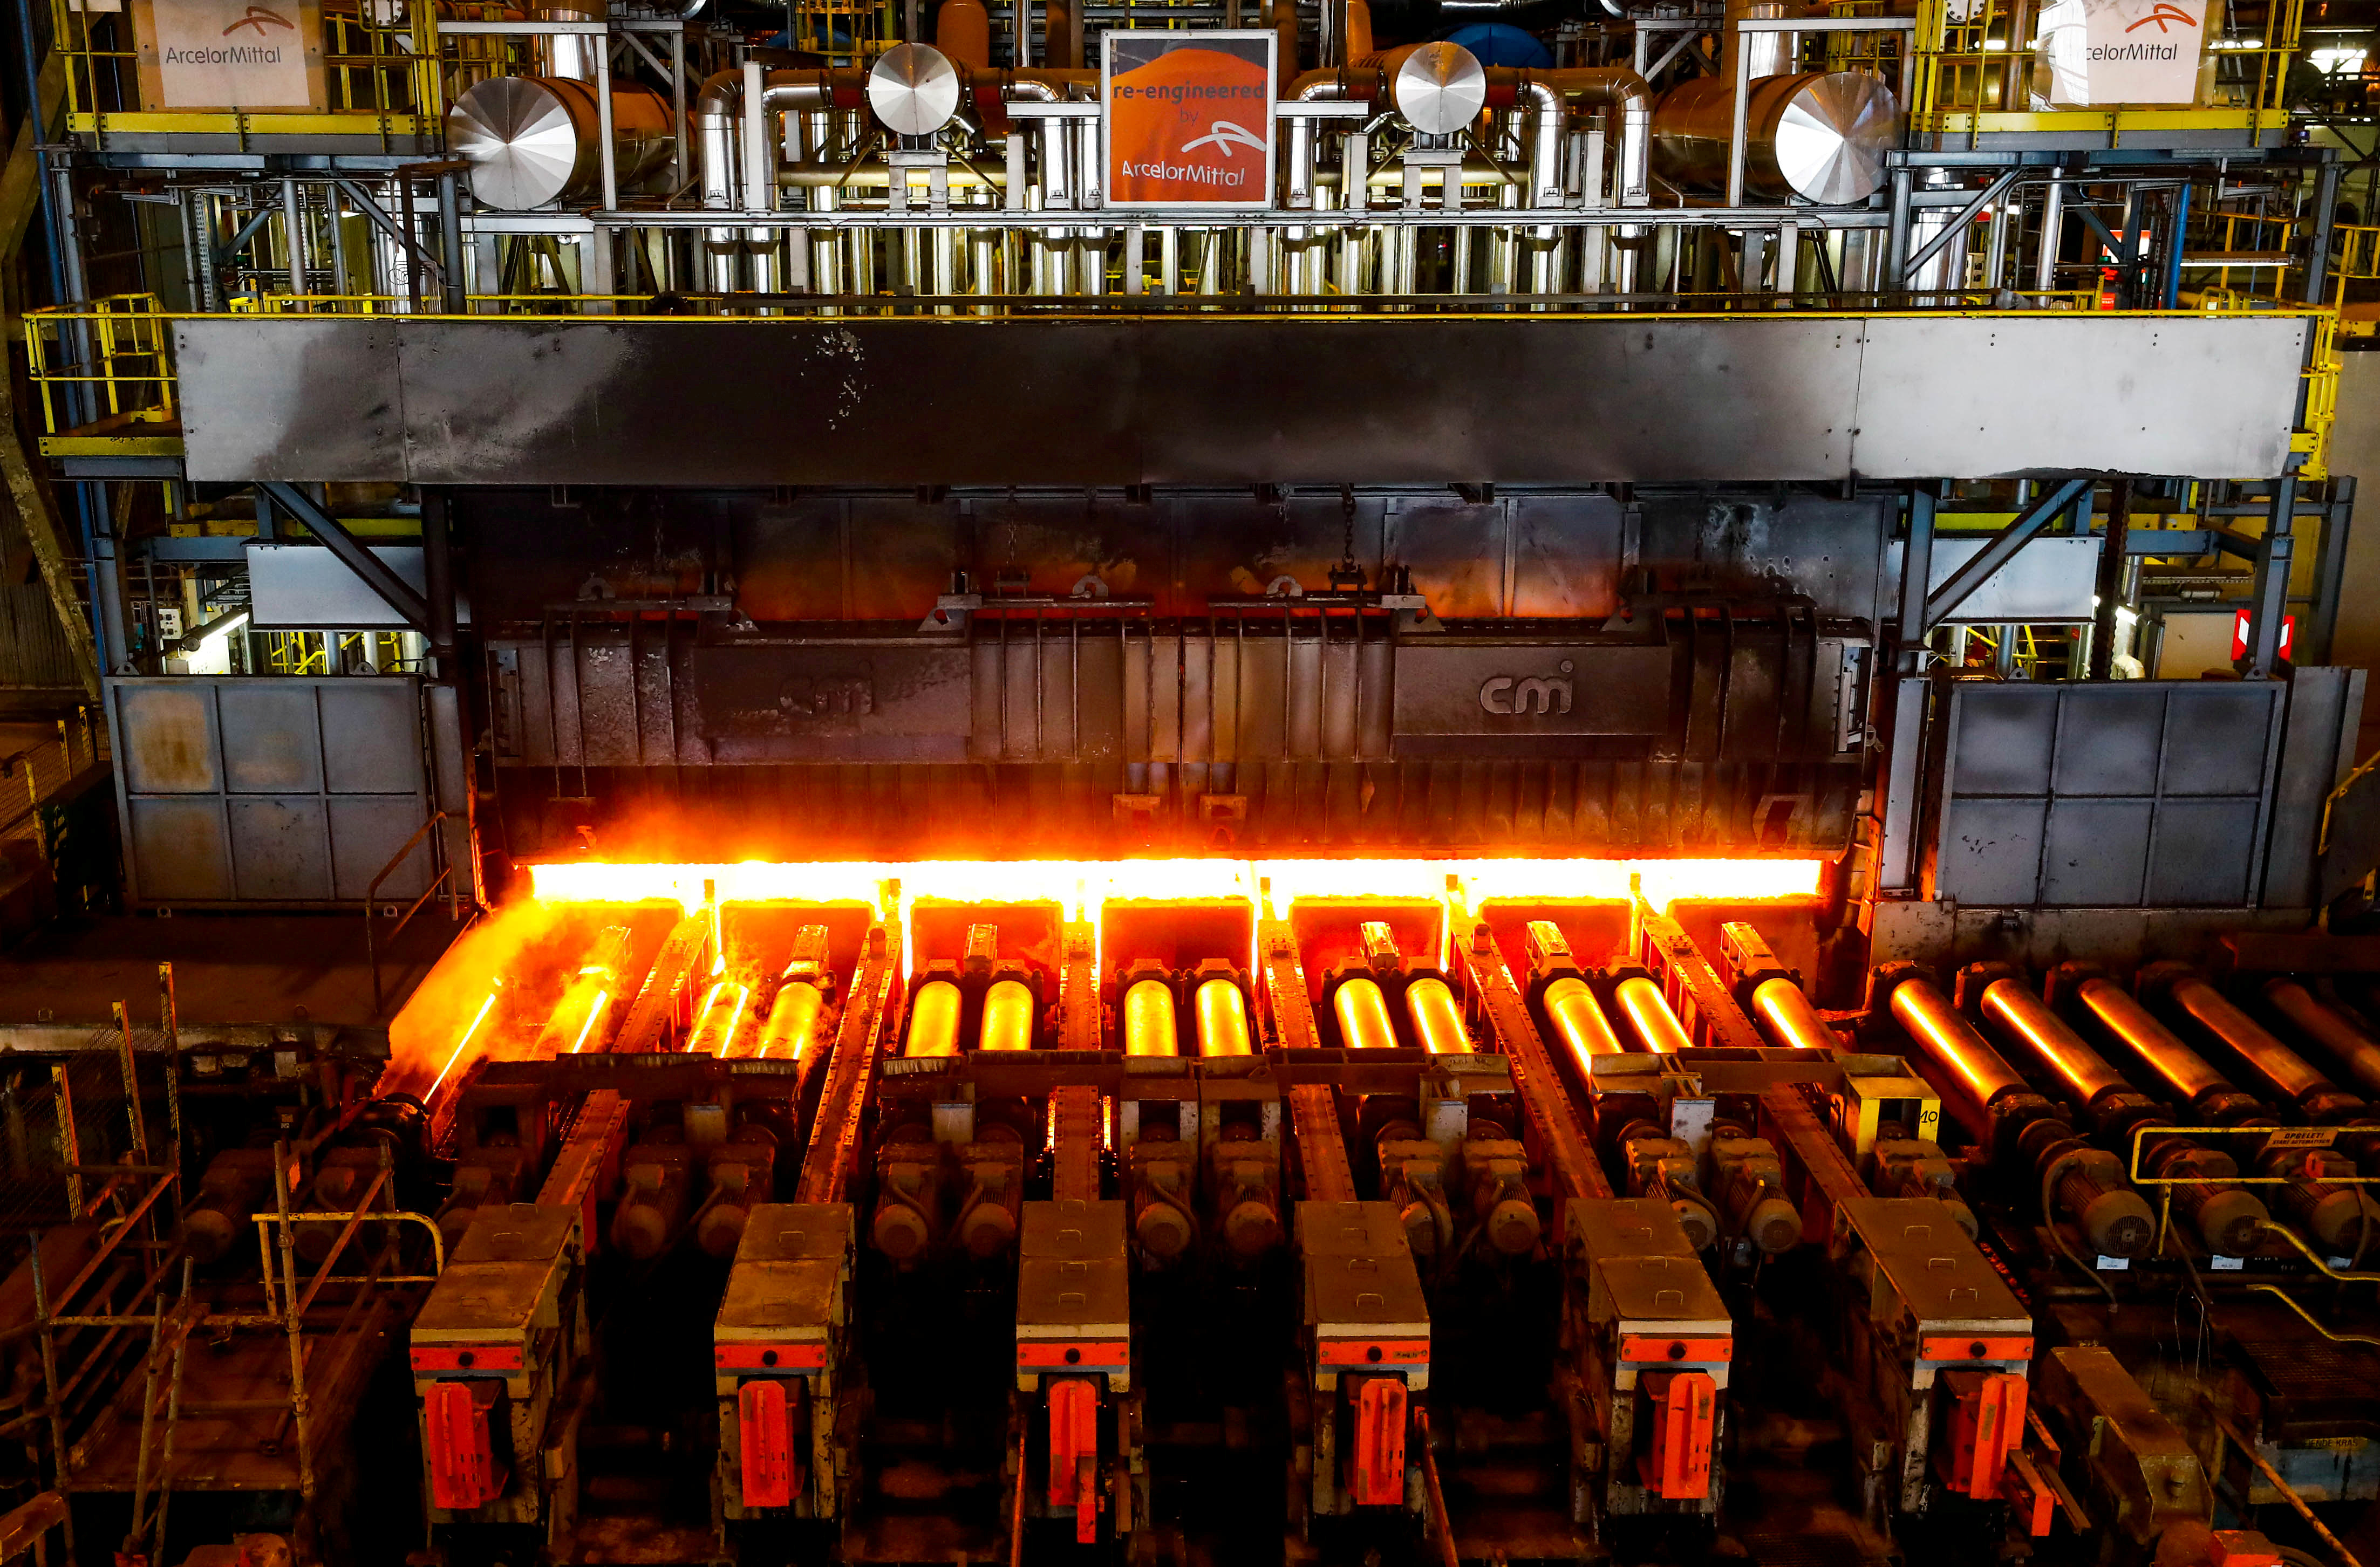 ArcelorMittal increases share buy-back programme by $1 bln